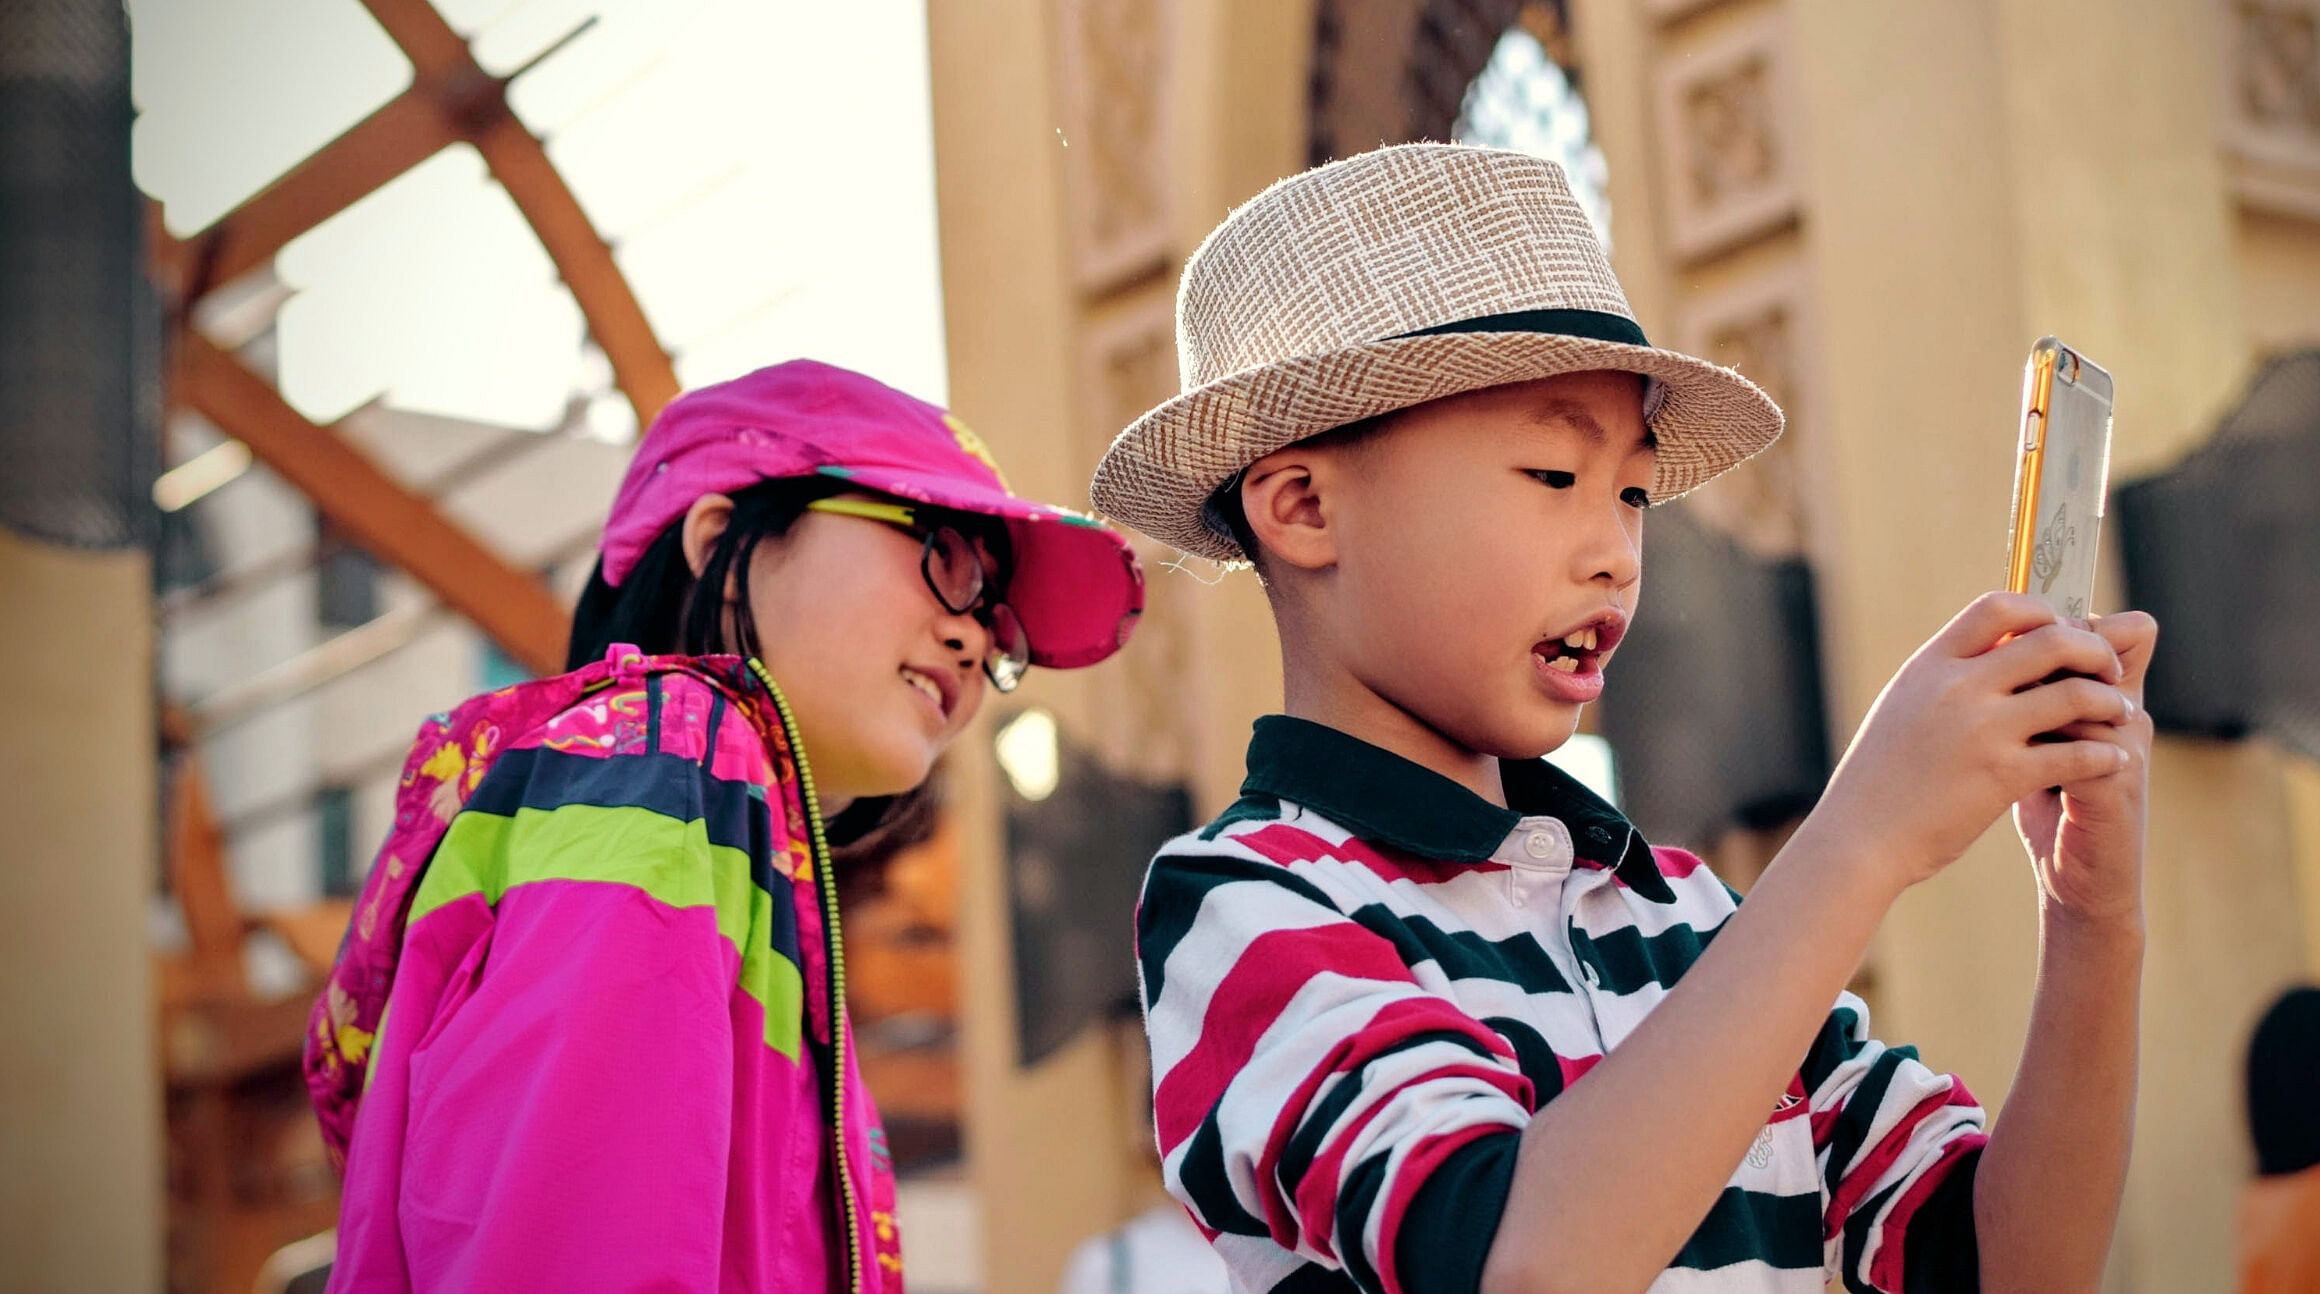 Kids on a phone while traveling